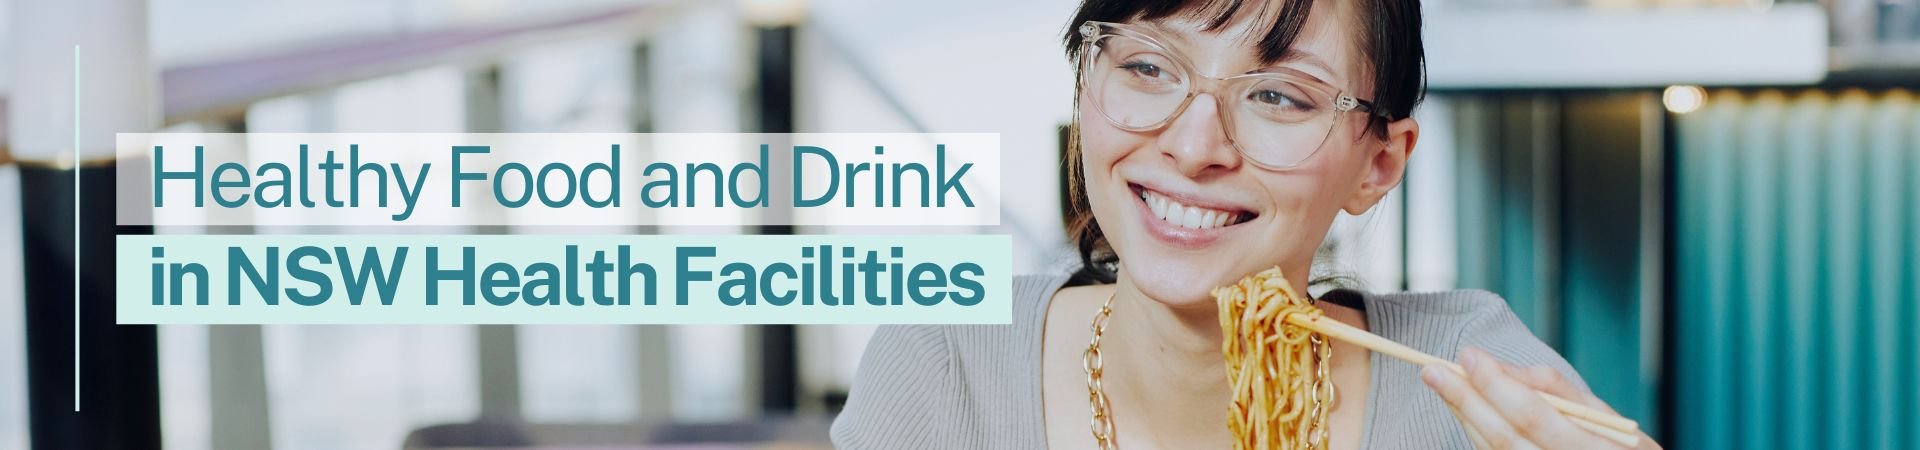 Healthy Food and Drink in NSW Health Facilities Toolkit